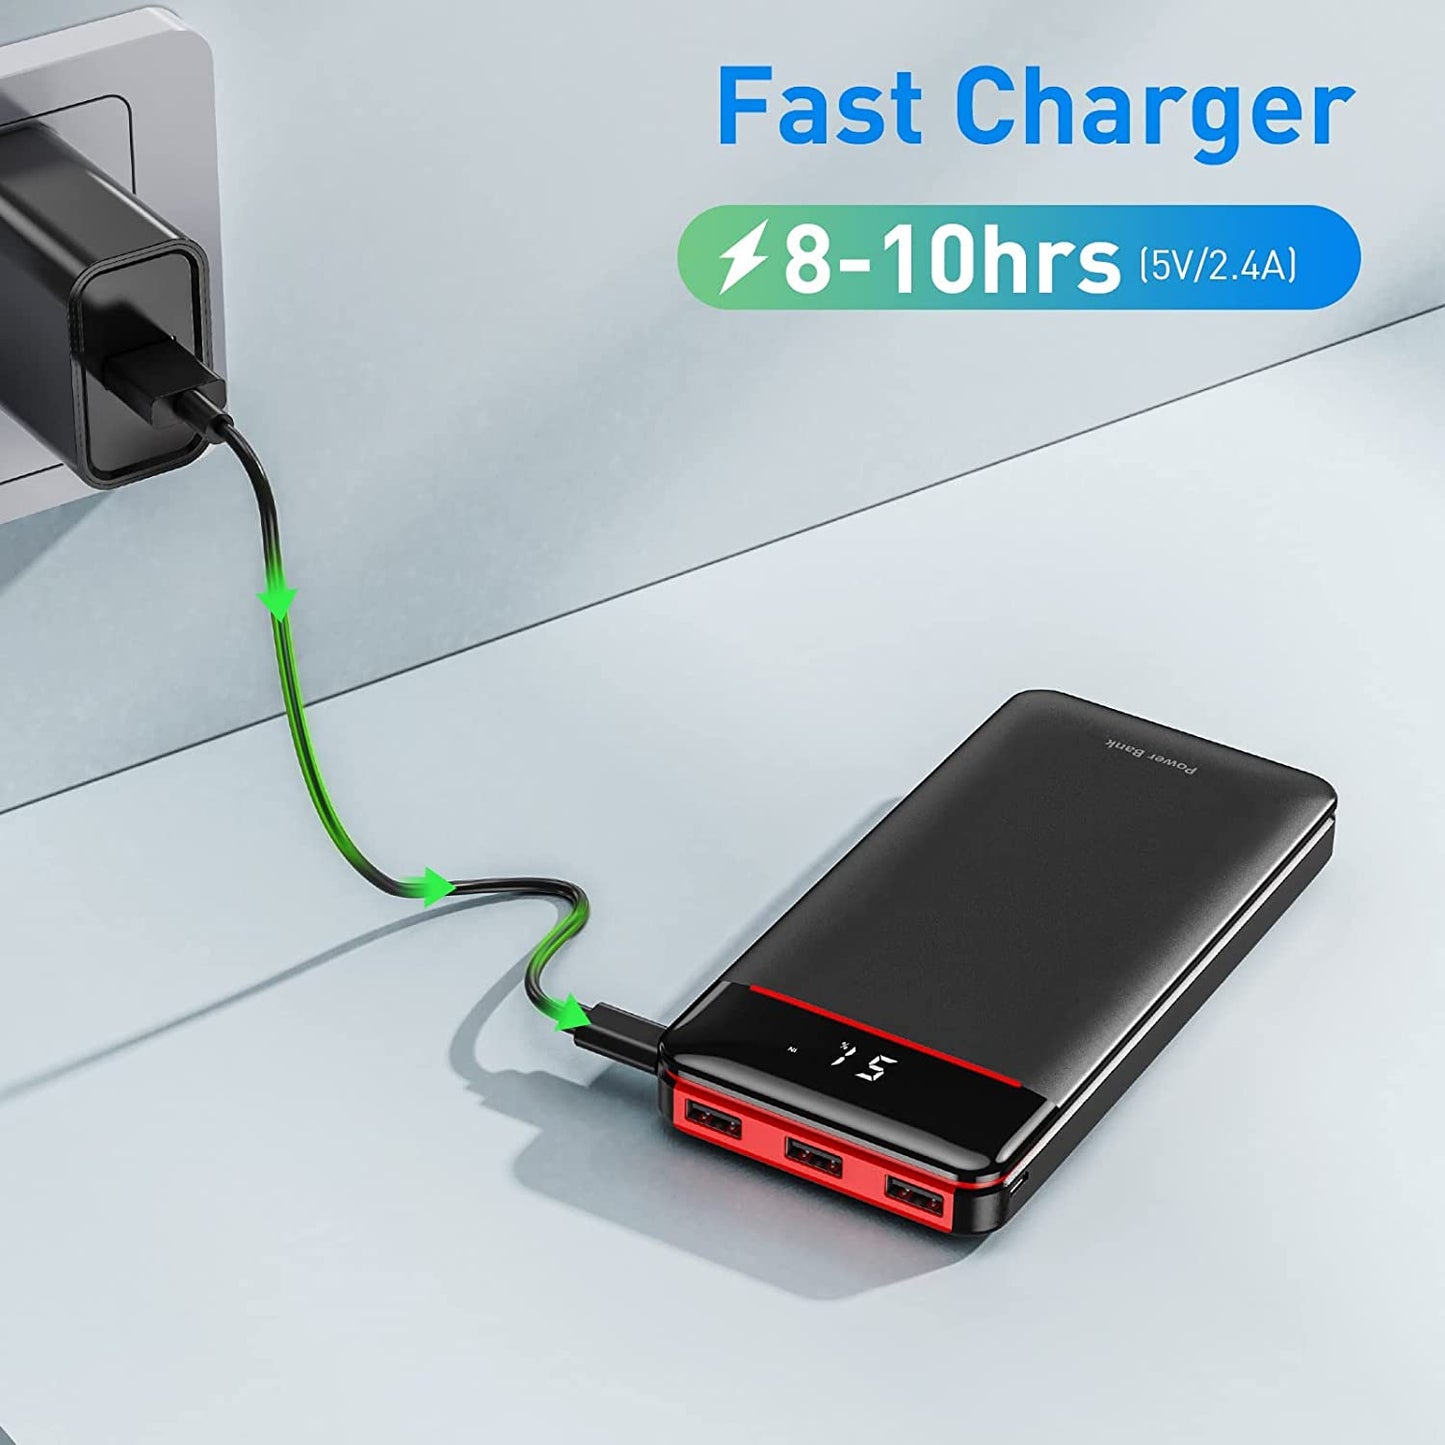 Portable Fast Charger Power Bank 25,000Mah, Fast Charging USB C with 3 Outputs & 2 Inputs & Flashlight, Ultra High Capacity External Battery Pack for Cell Phone Compatible with iPhone, Samsung, Android Etc.